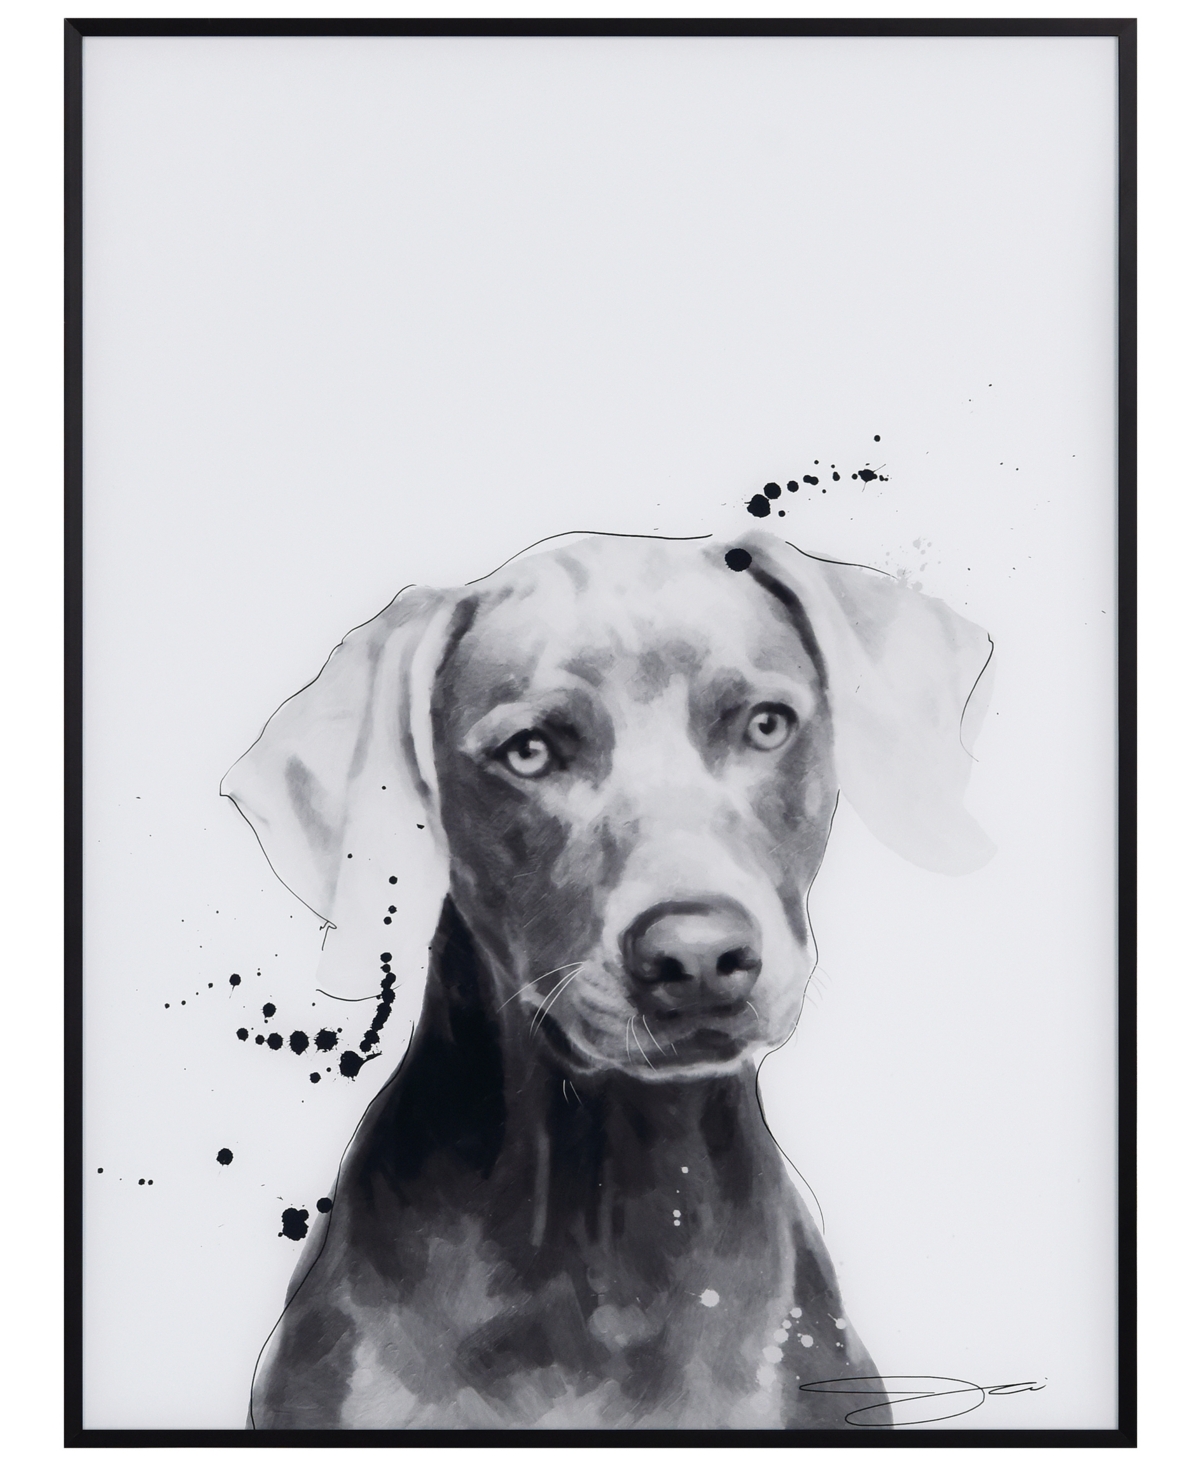 Empire Art Direct "weimaraner" Pet Paintings On Printed Glass Encased With A Black Anodized Frame, 24" X 18" X 1" In Black And White